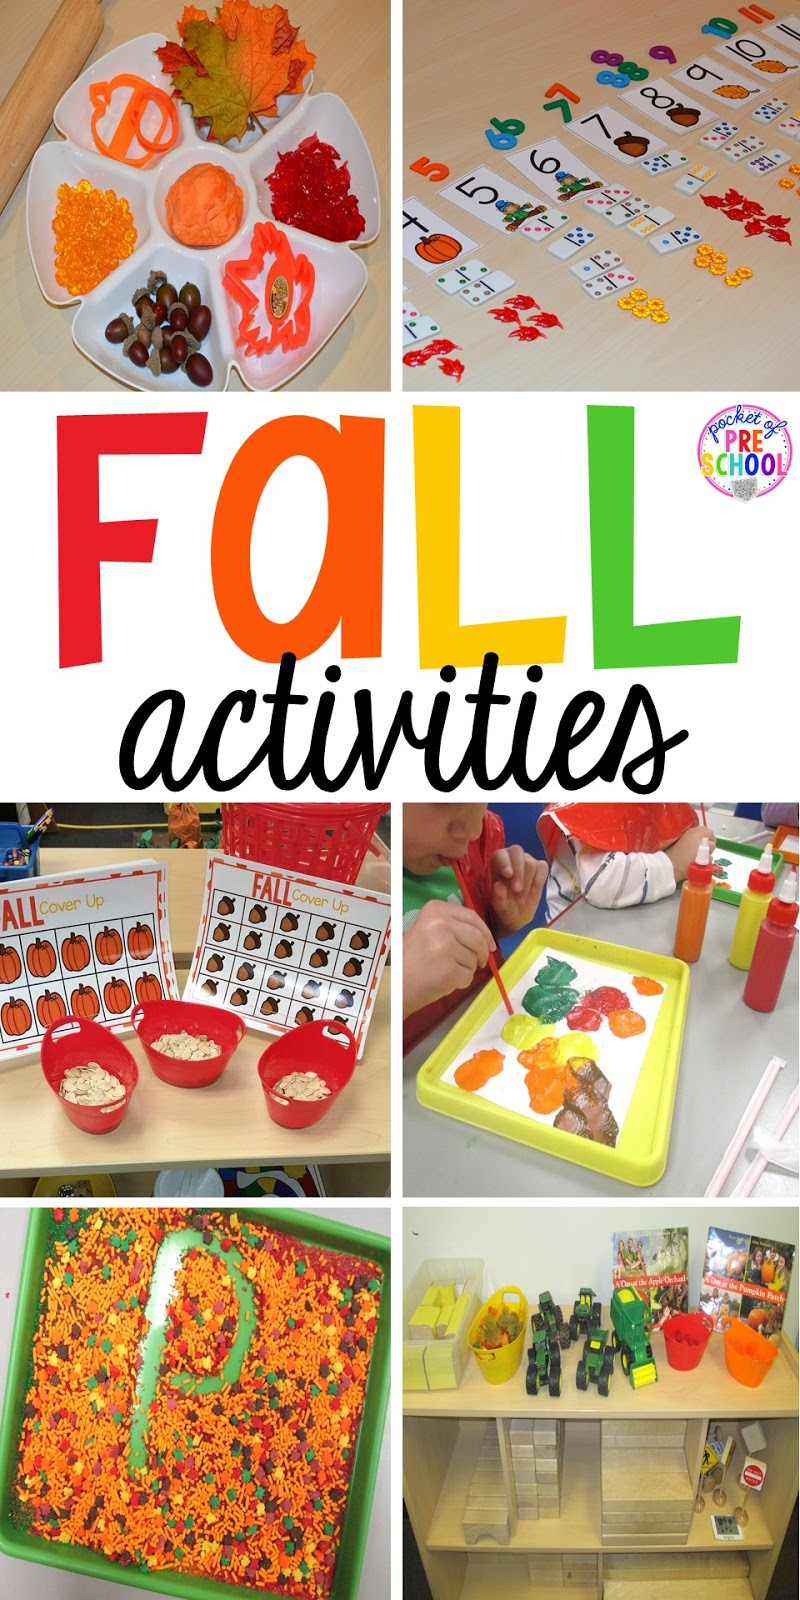 Fall Science Activities For Preschoolers
 Fall Themed Activities for Little Learners Pocket of